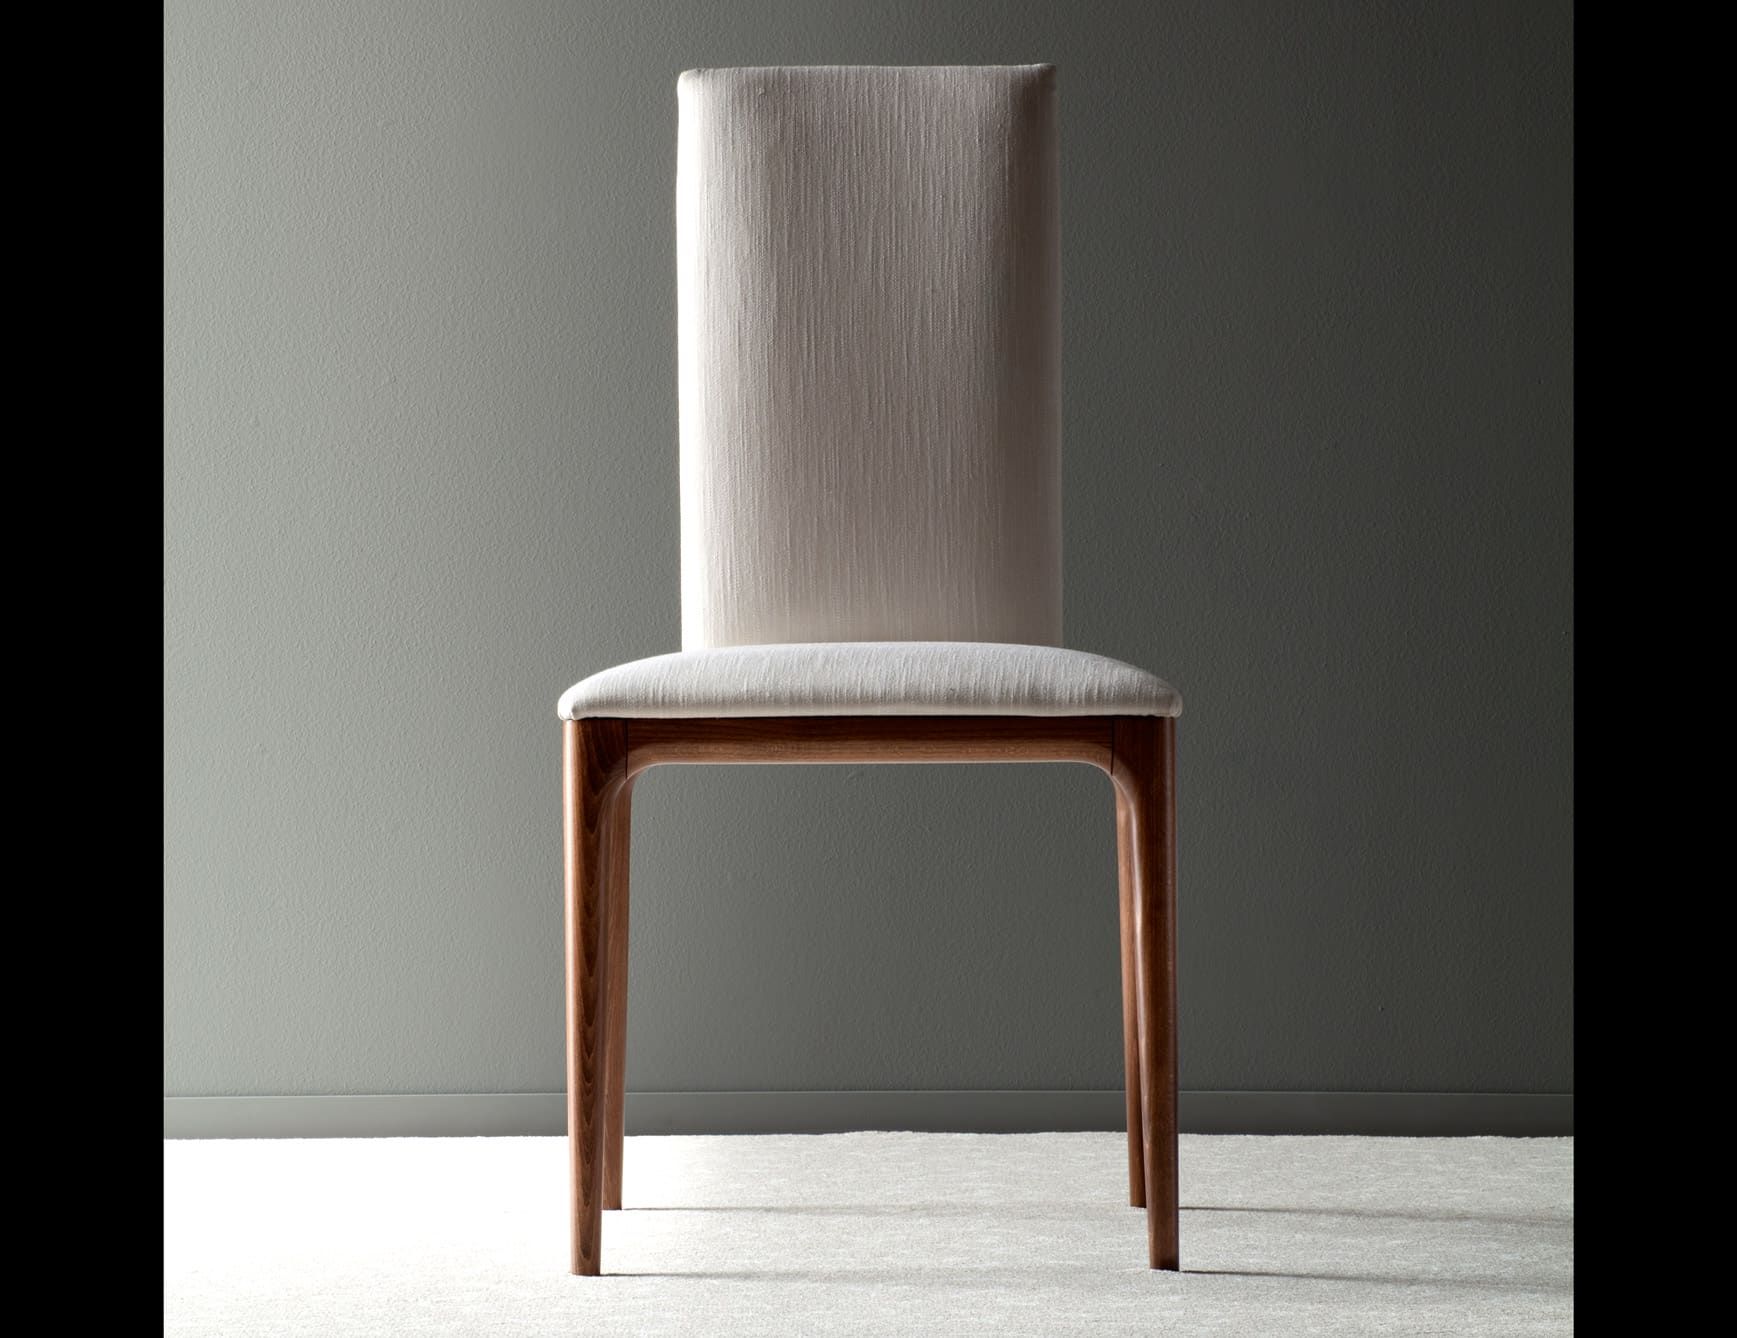 Four Seasons modern Italian chair with white leather